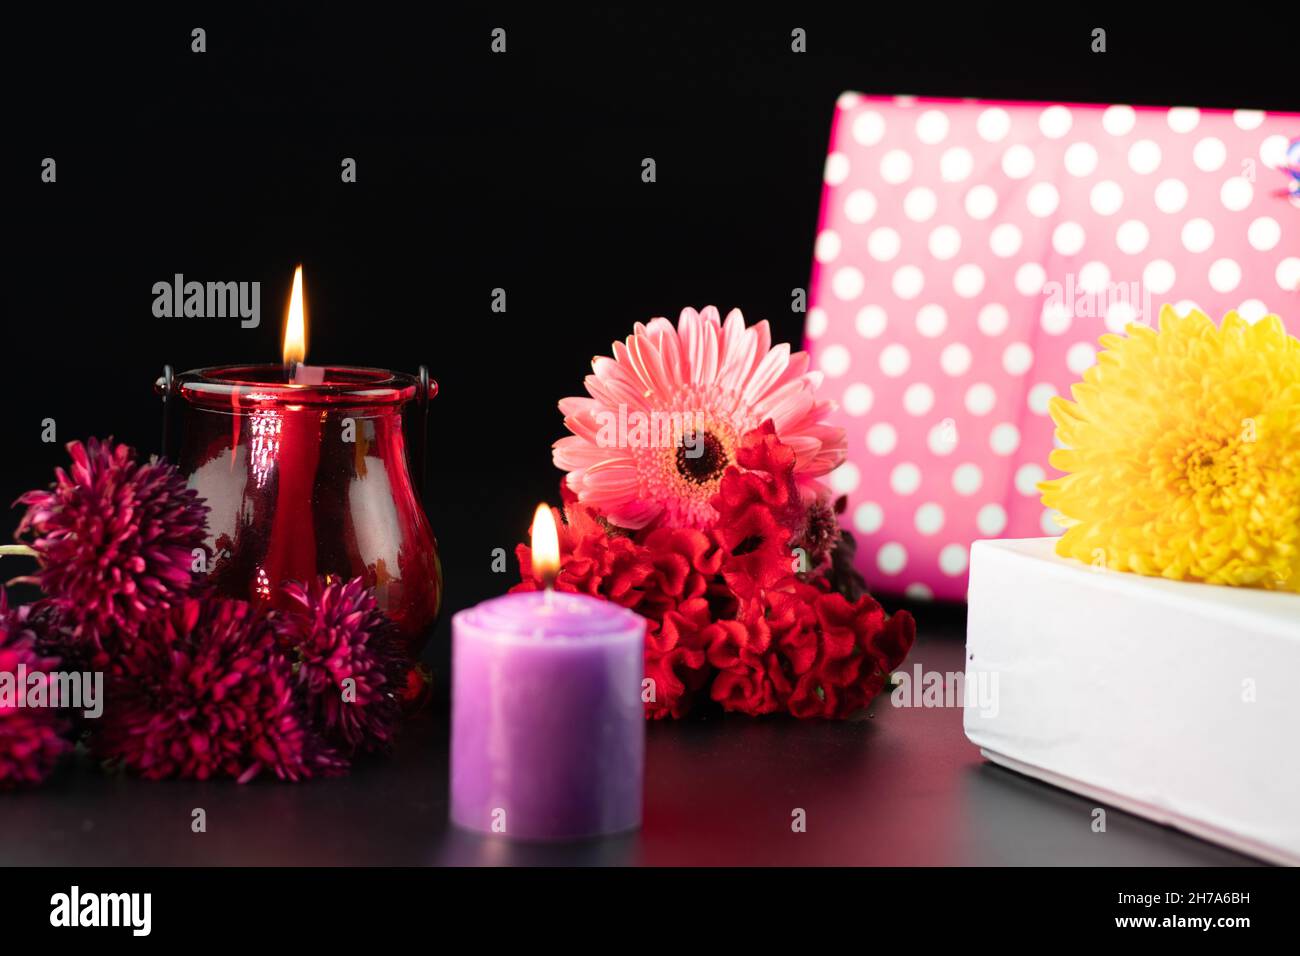 Selective Focus On Decorative Red Or Maroon Pillar Wax Candle Glowing In Designer Glass Holder Lantern. Beautiful Fresh Colorful Flowers And Gift Boxe Stock Photo